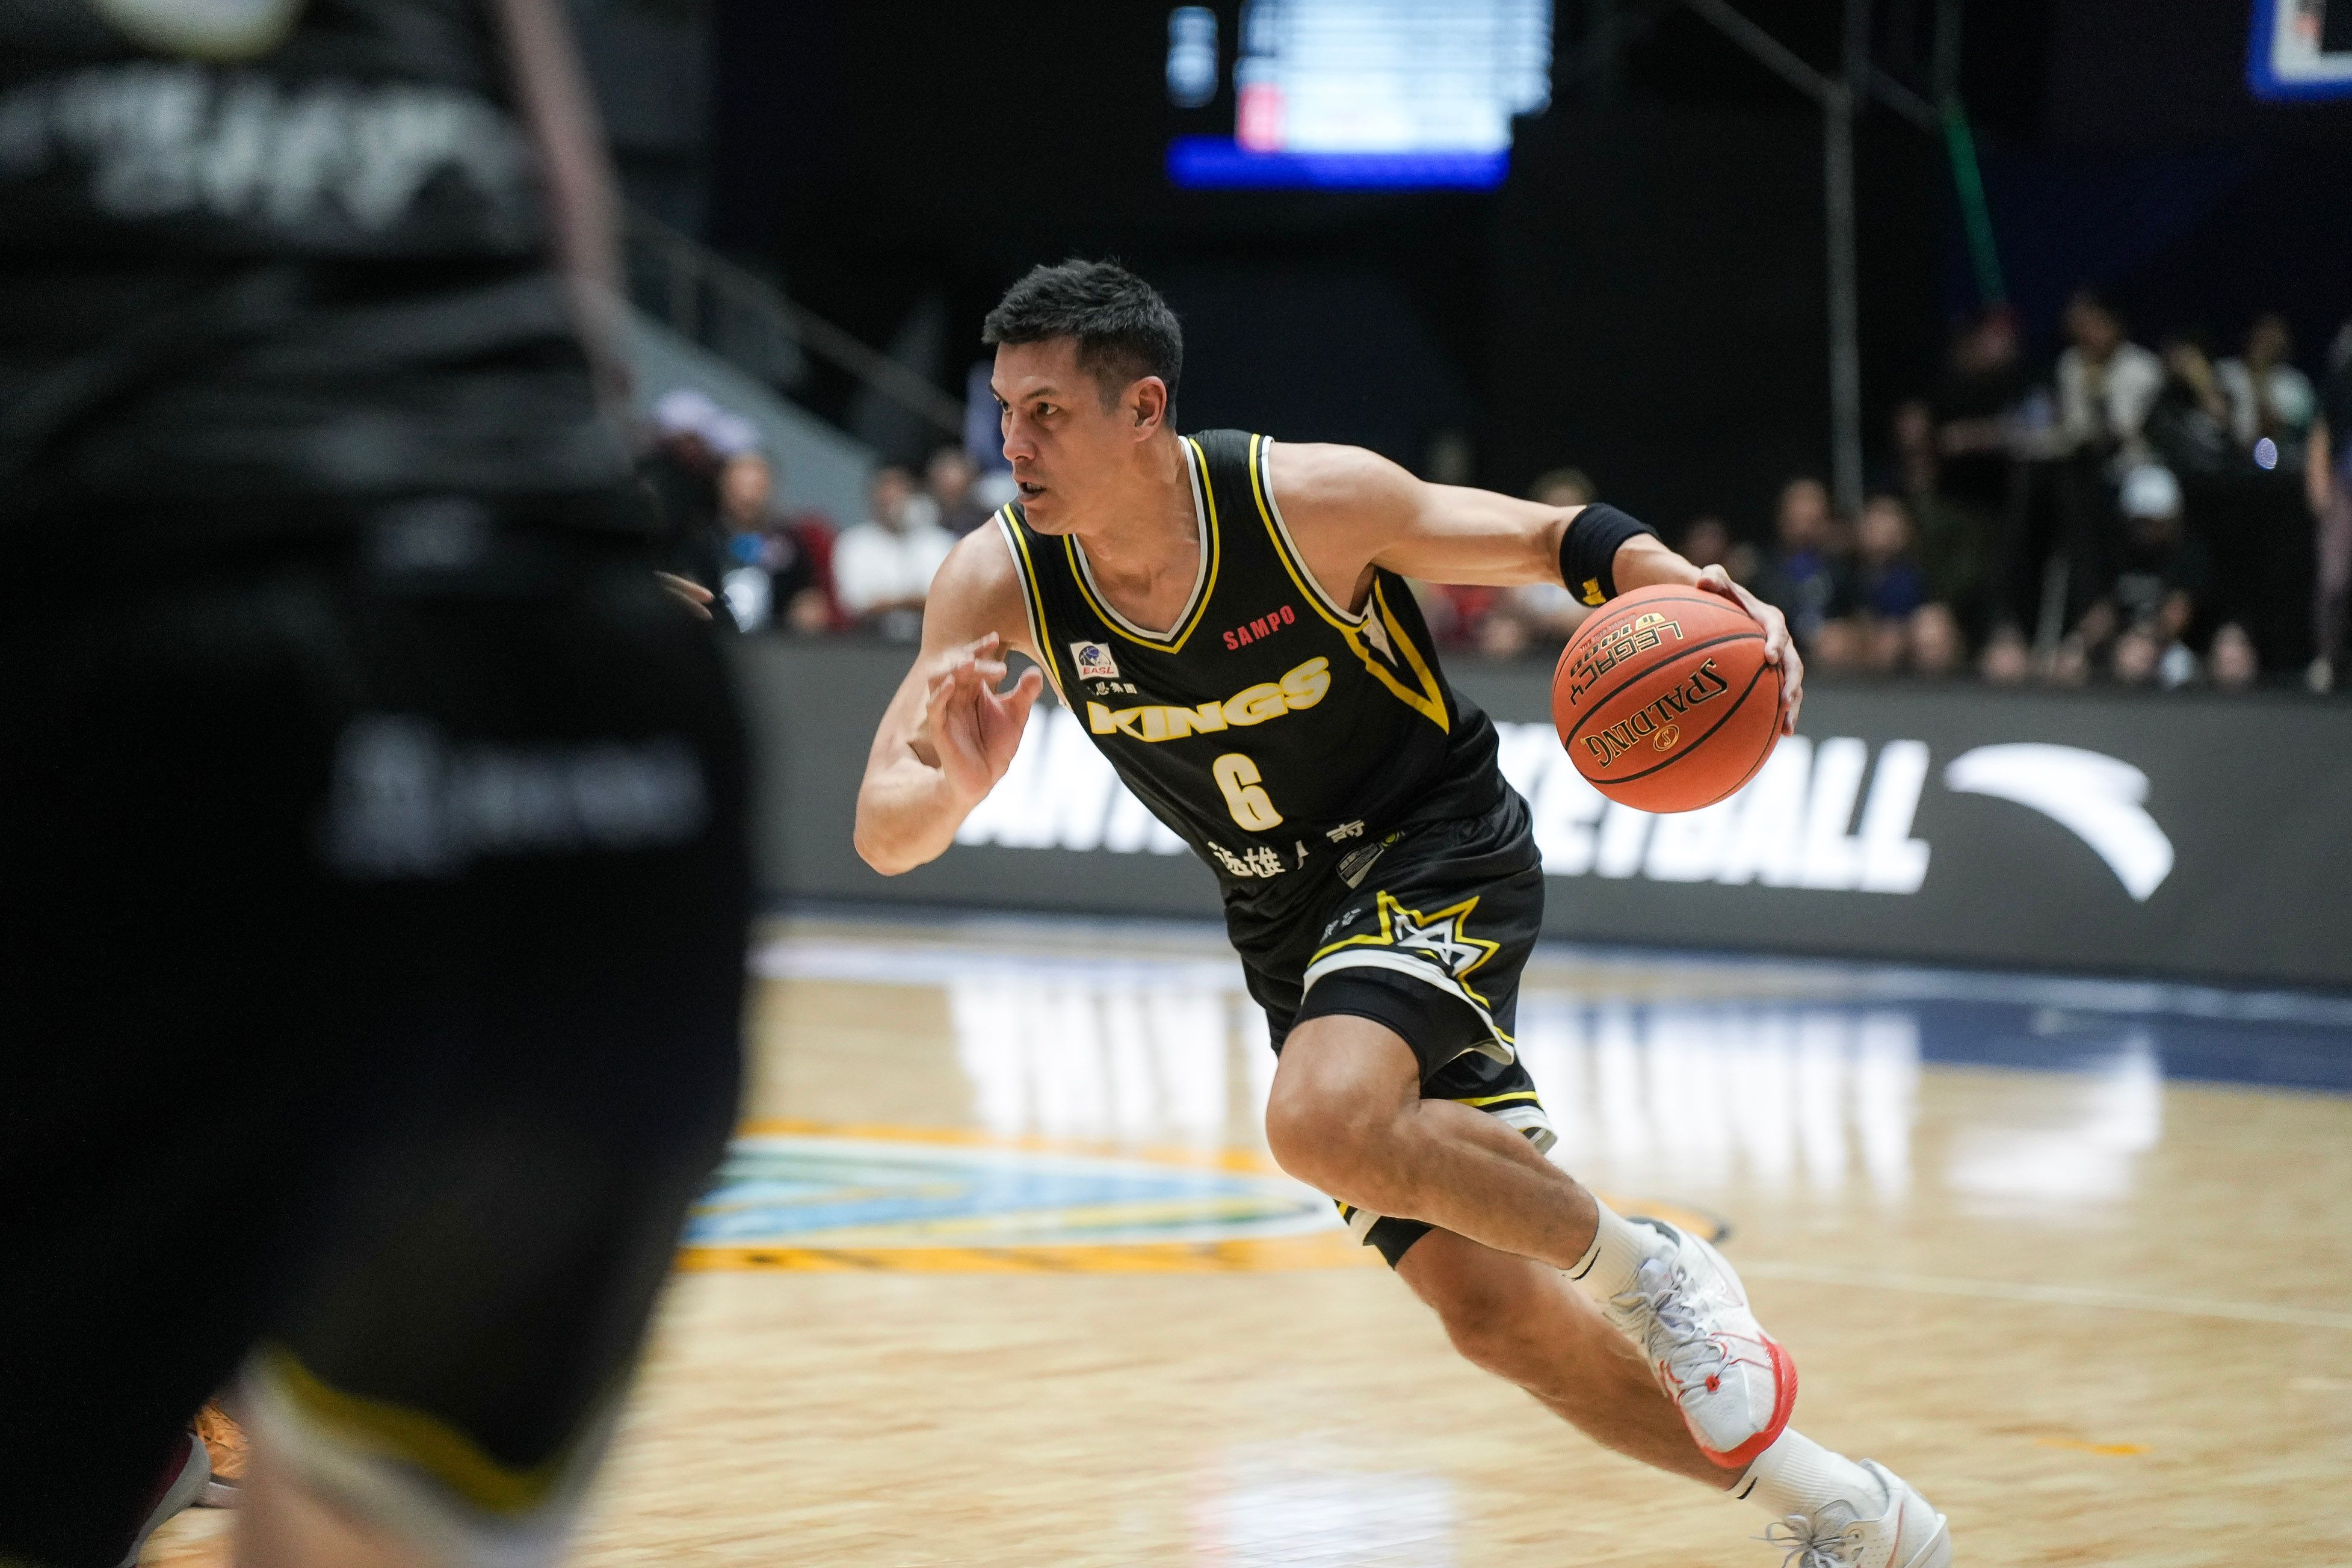 Chiba Jets Defeat New Taipei Kings in East Asian Super League Semi-Finals: Yuki Togashi Shines with Game-High 28 Points